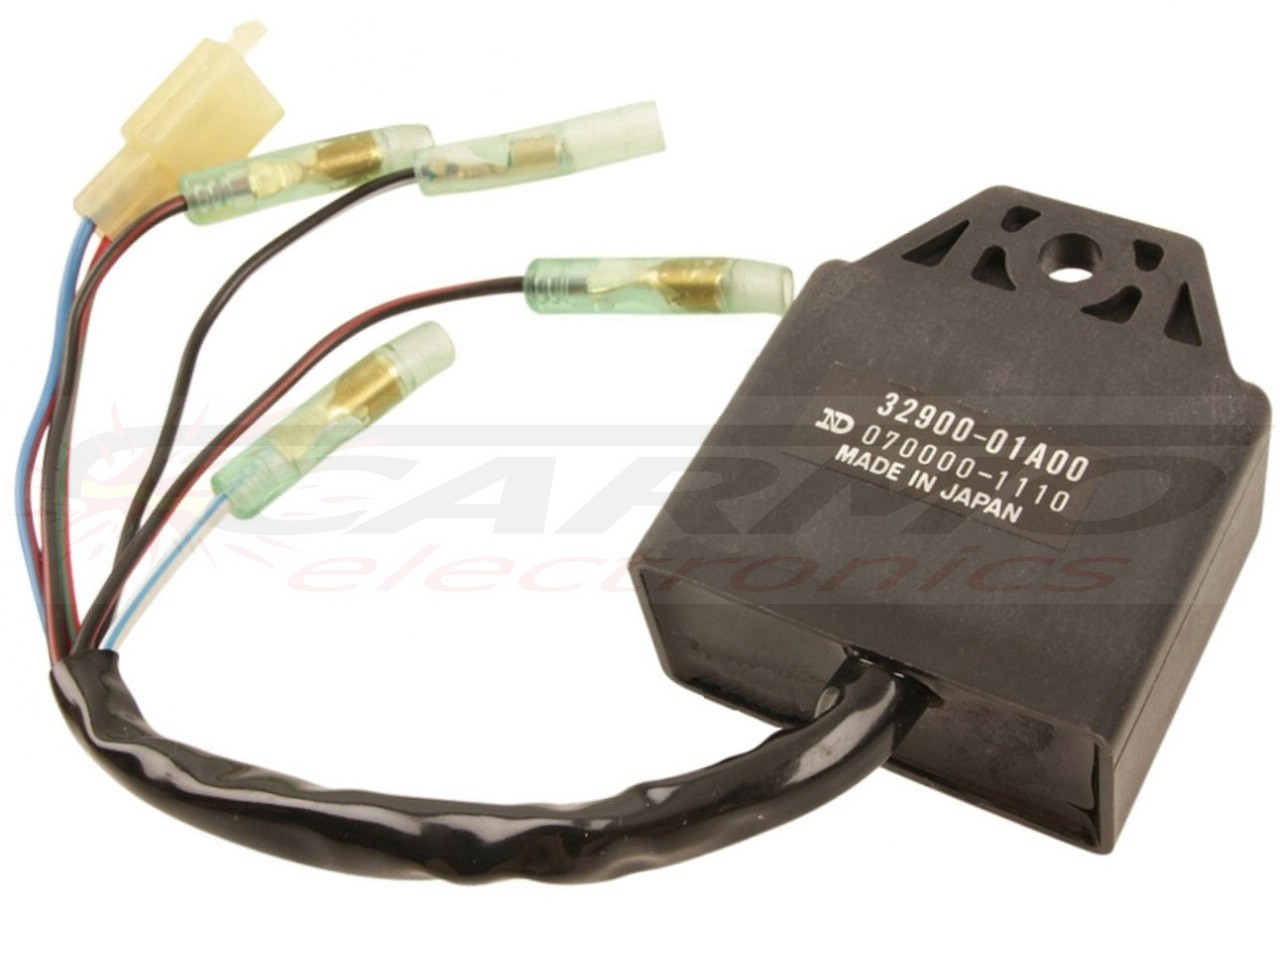 TS125x igniter ignition module CDI Box (32900-01A00, 070000-1110, ND, MADE IN JAPAN)